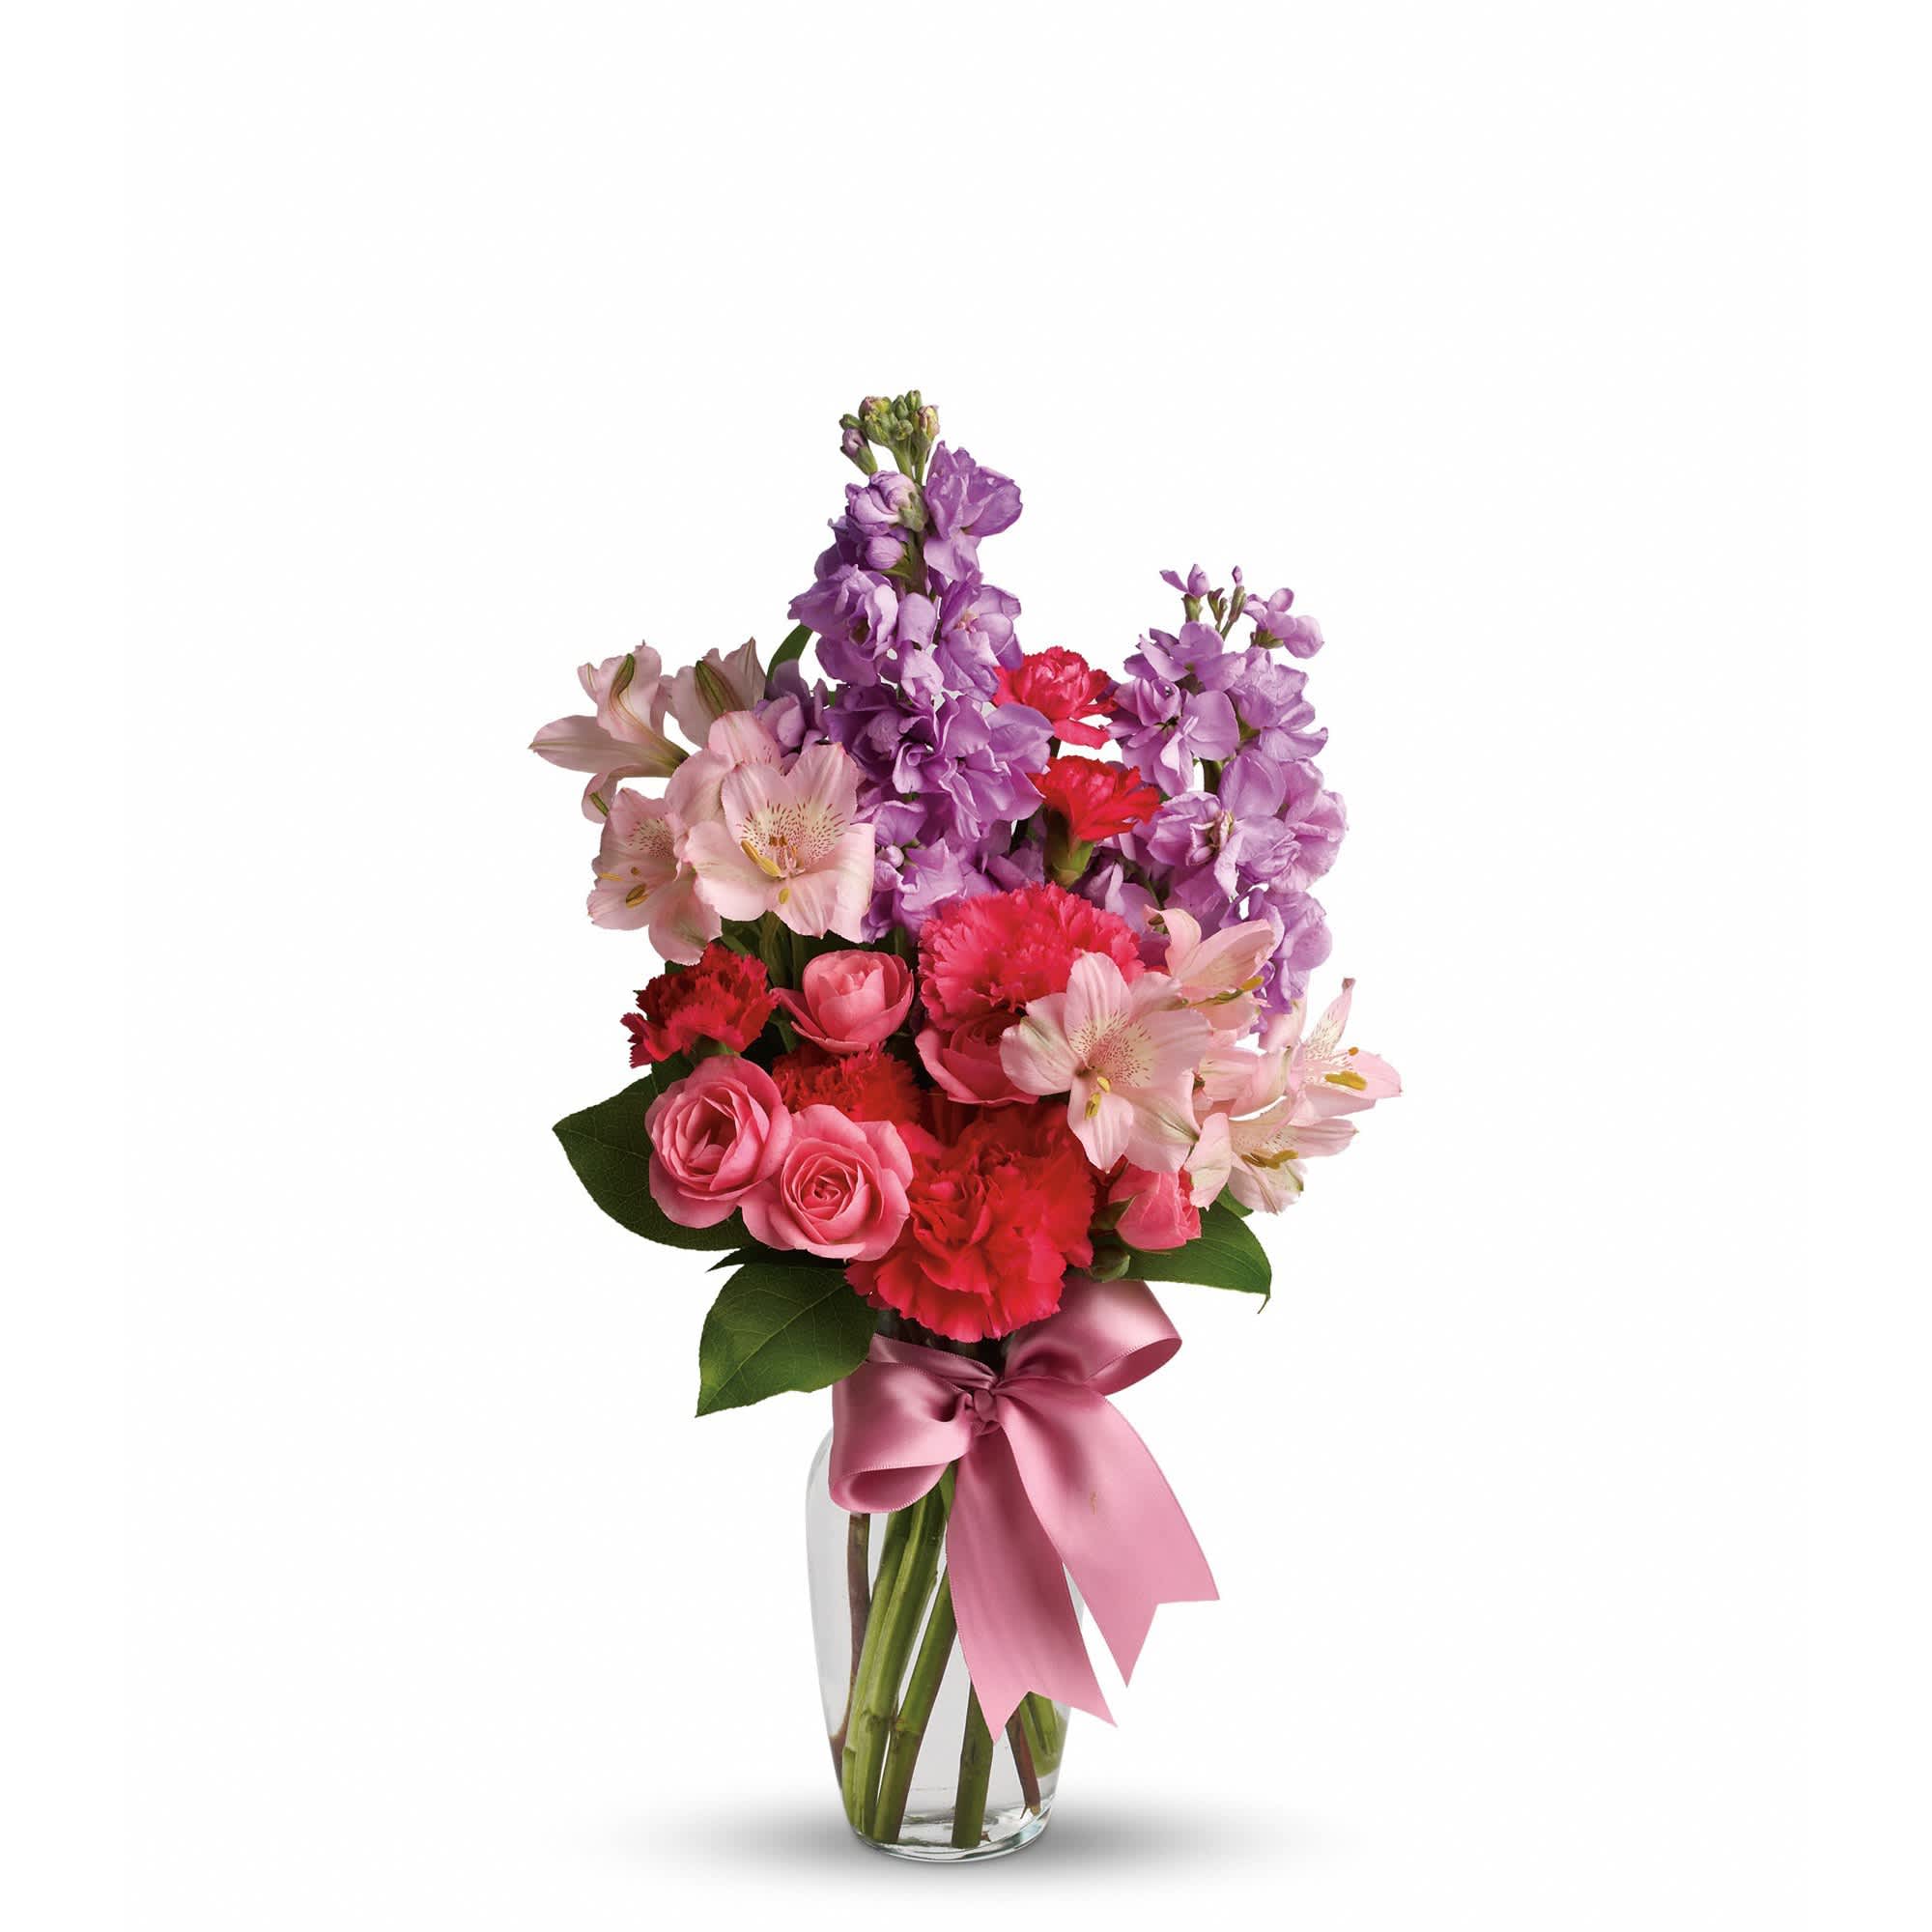 Jumping for Joy by Teleflora - Someone you know (or want to know!) will jump for joy when she receives this charming bouquet. Soft and feminine colors, flowers and textures are all wrapped up in one pretty package.